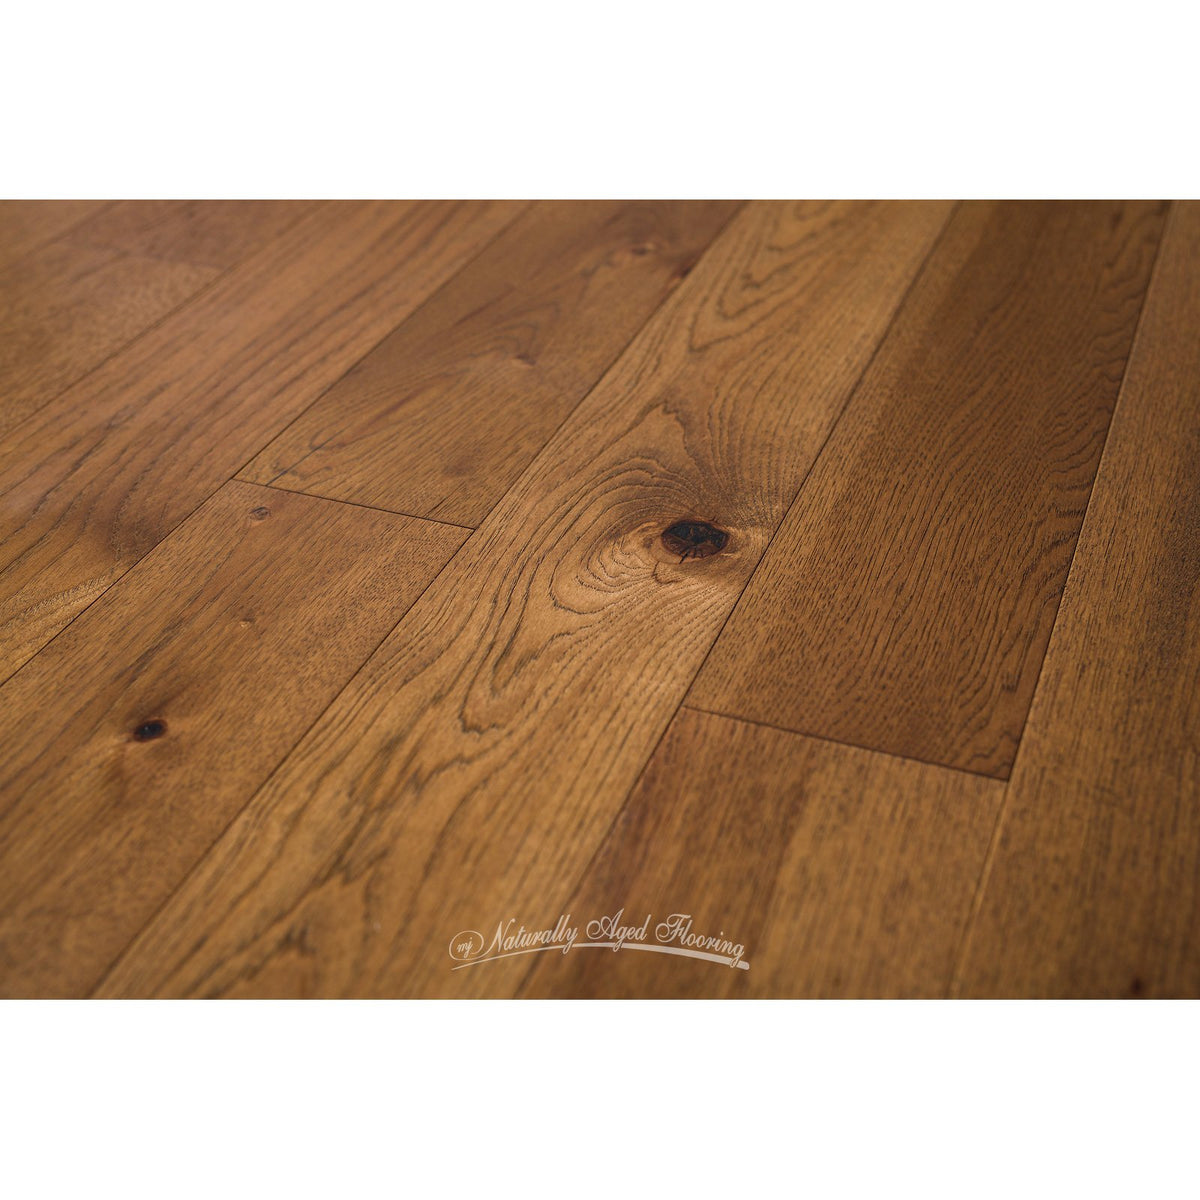 Naturally Aged Flooring - Royal Collection- Wire Brushed Hickory Engineered Hardwood - Timberland